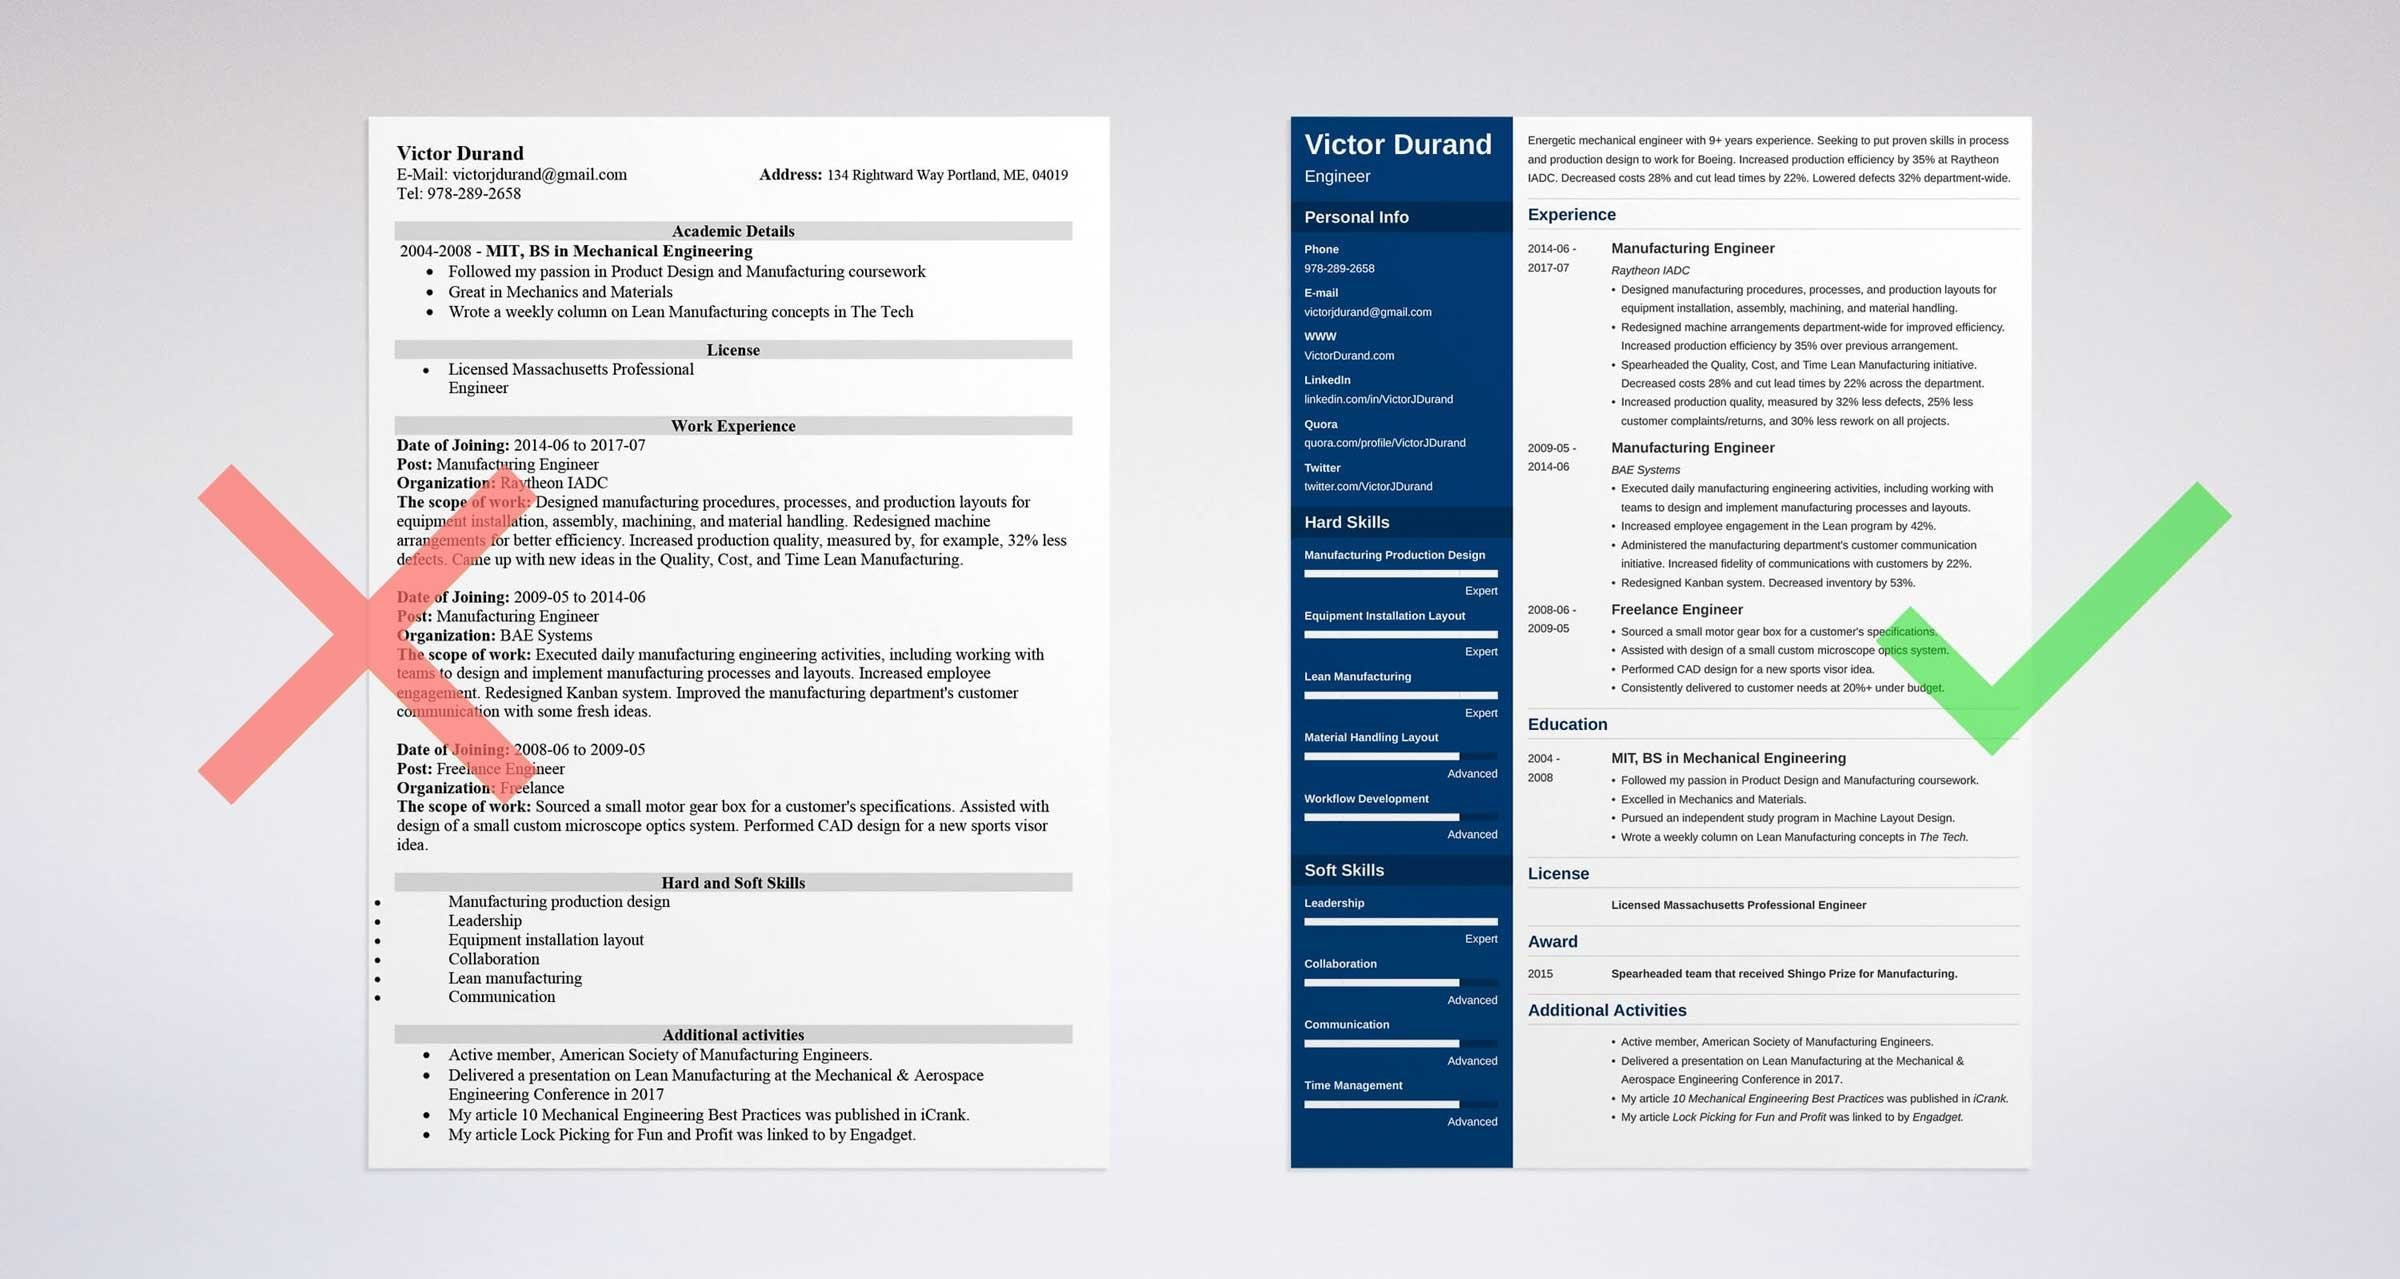 Resume Template Download for Engineering Freshers Engineering Resume: Templates, Examples & Essential Skills